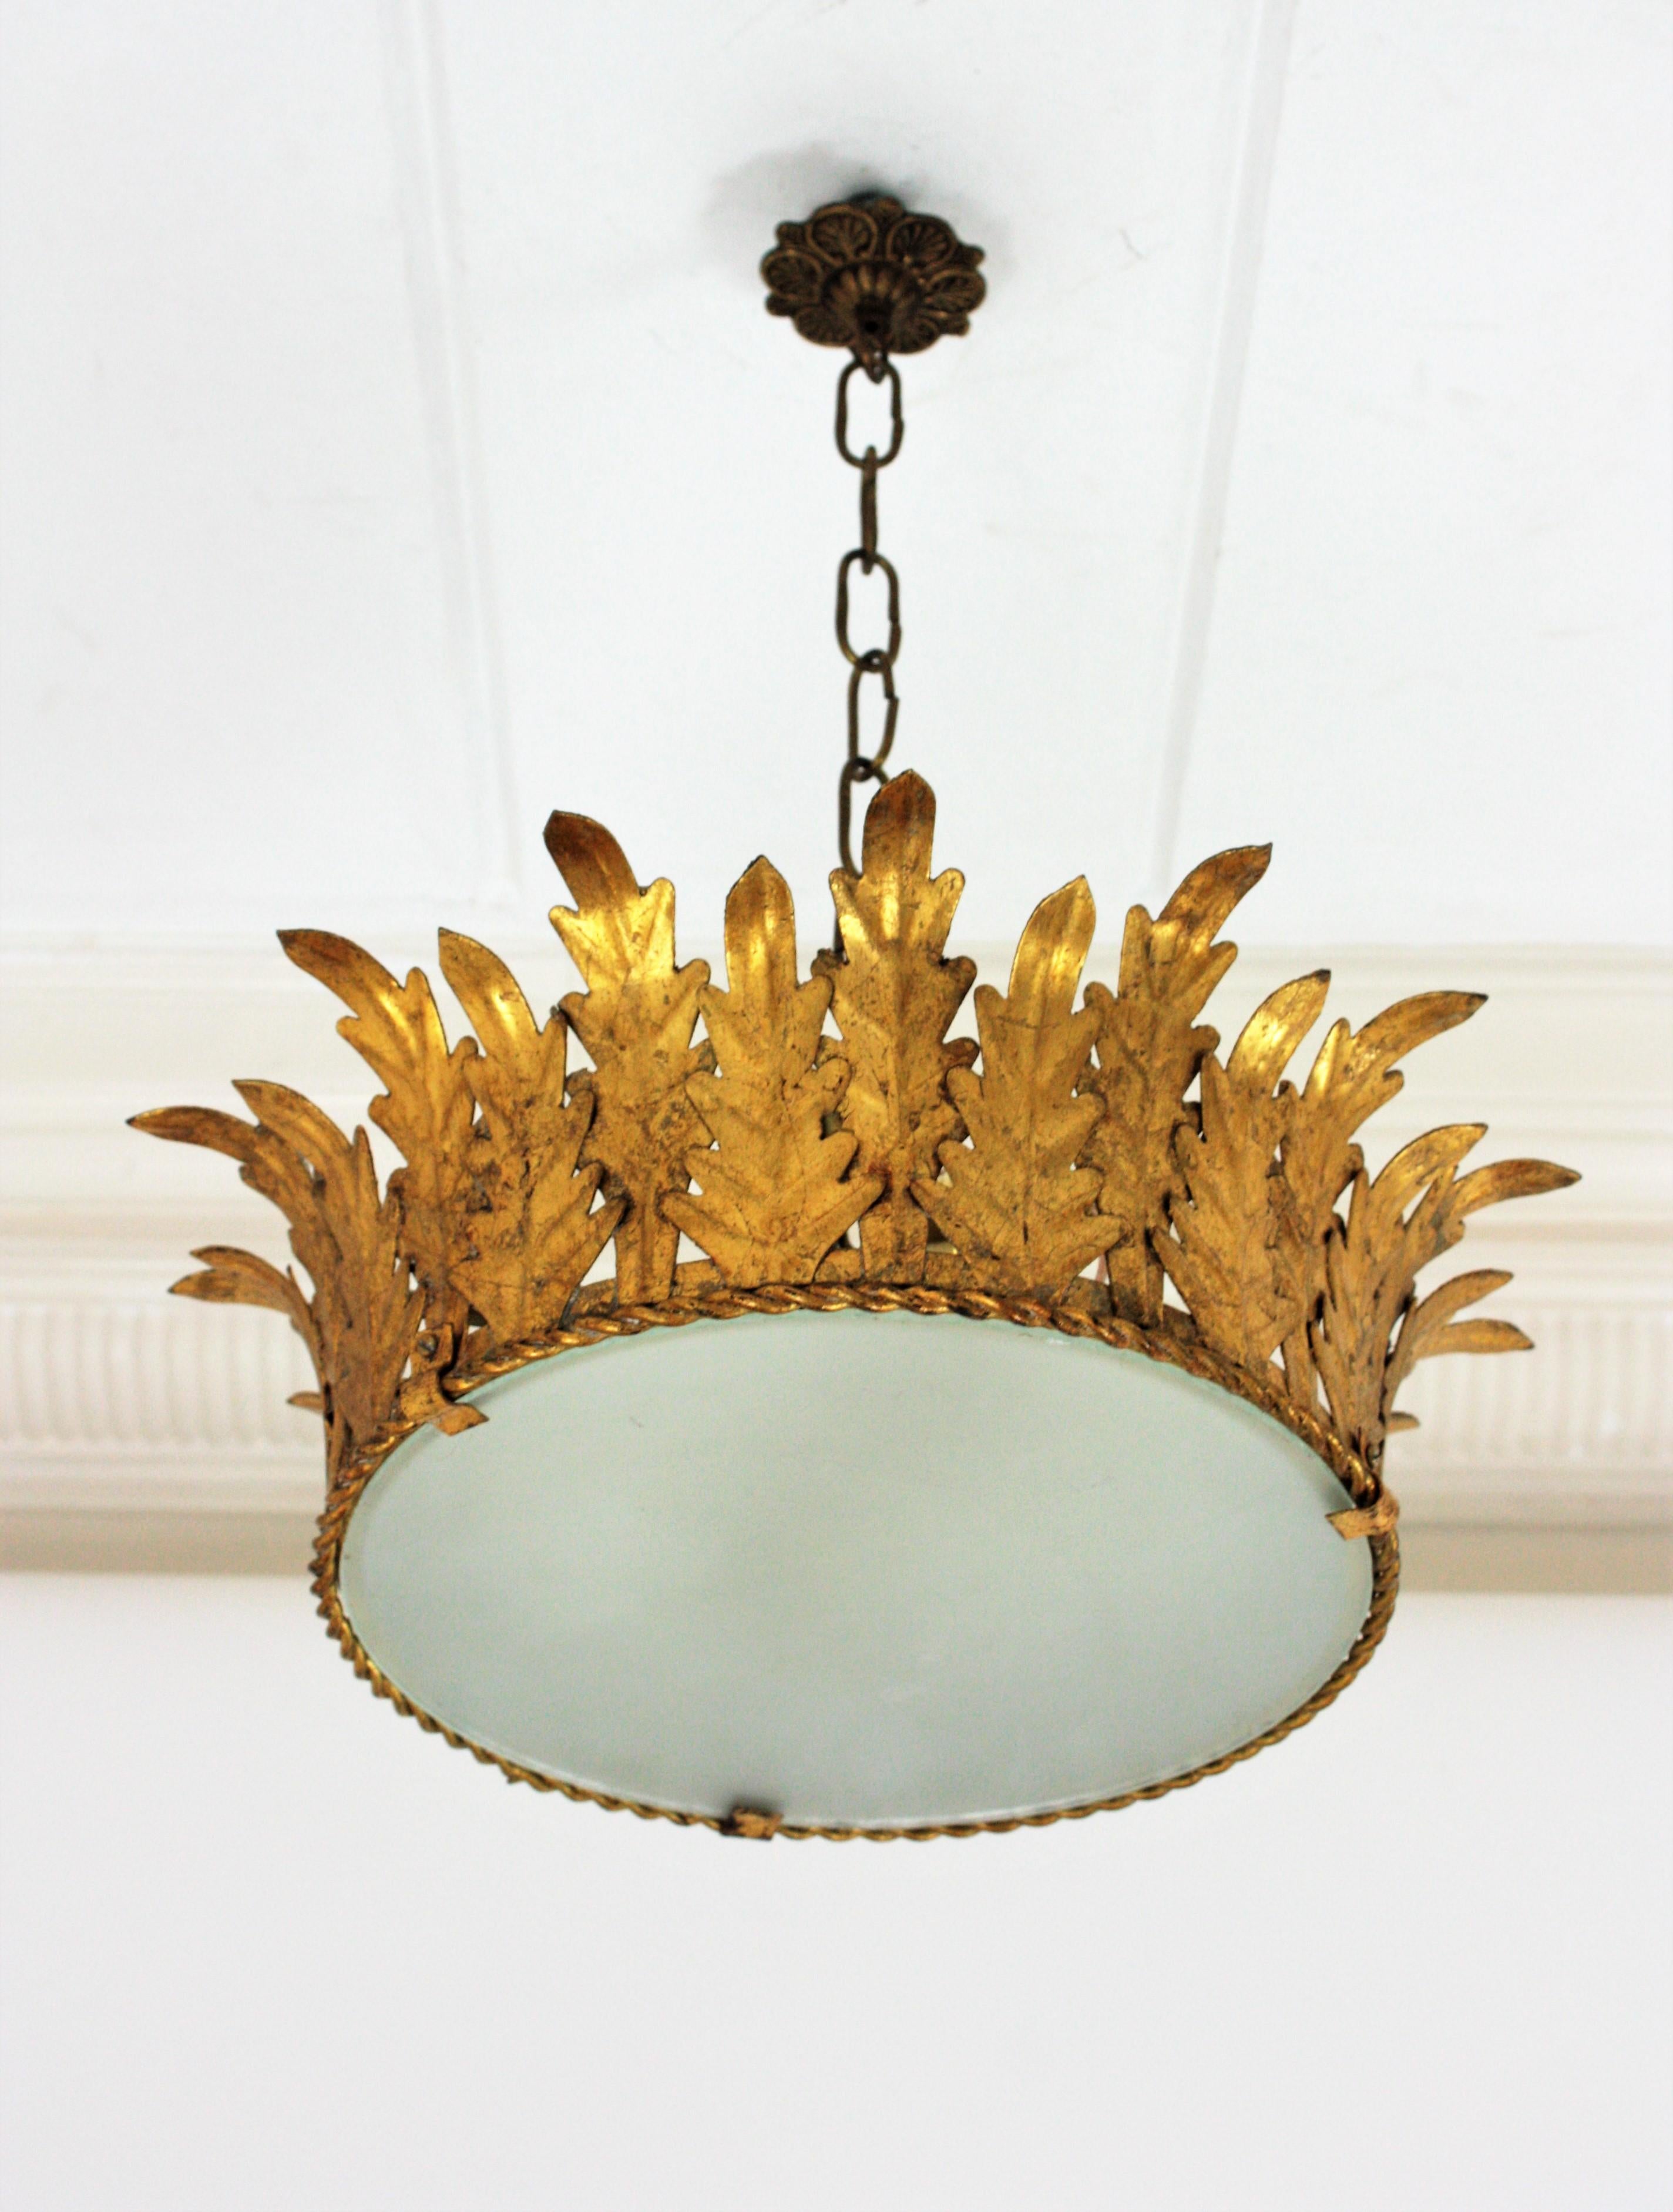 Large neoclassical style hand-hammered gold leaf gilt iron crown flushmount or pendant, France, 1940s.
This elegant ceiling light features a gilt metal structure adorned with foliage motifs. It has a frosted glass diffuser that allows to disperse a